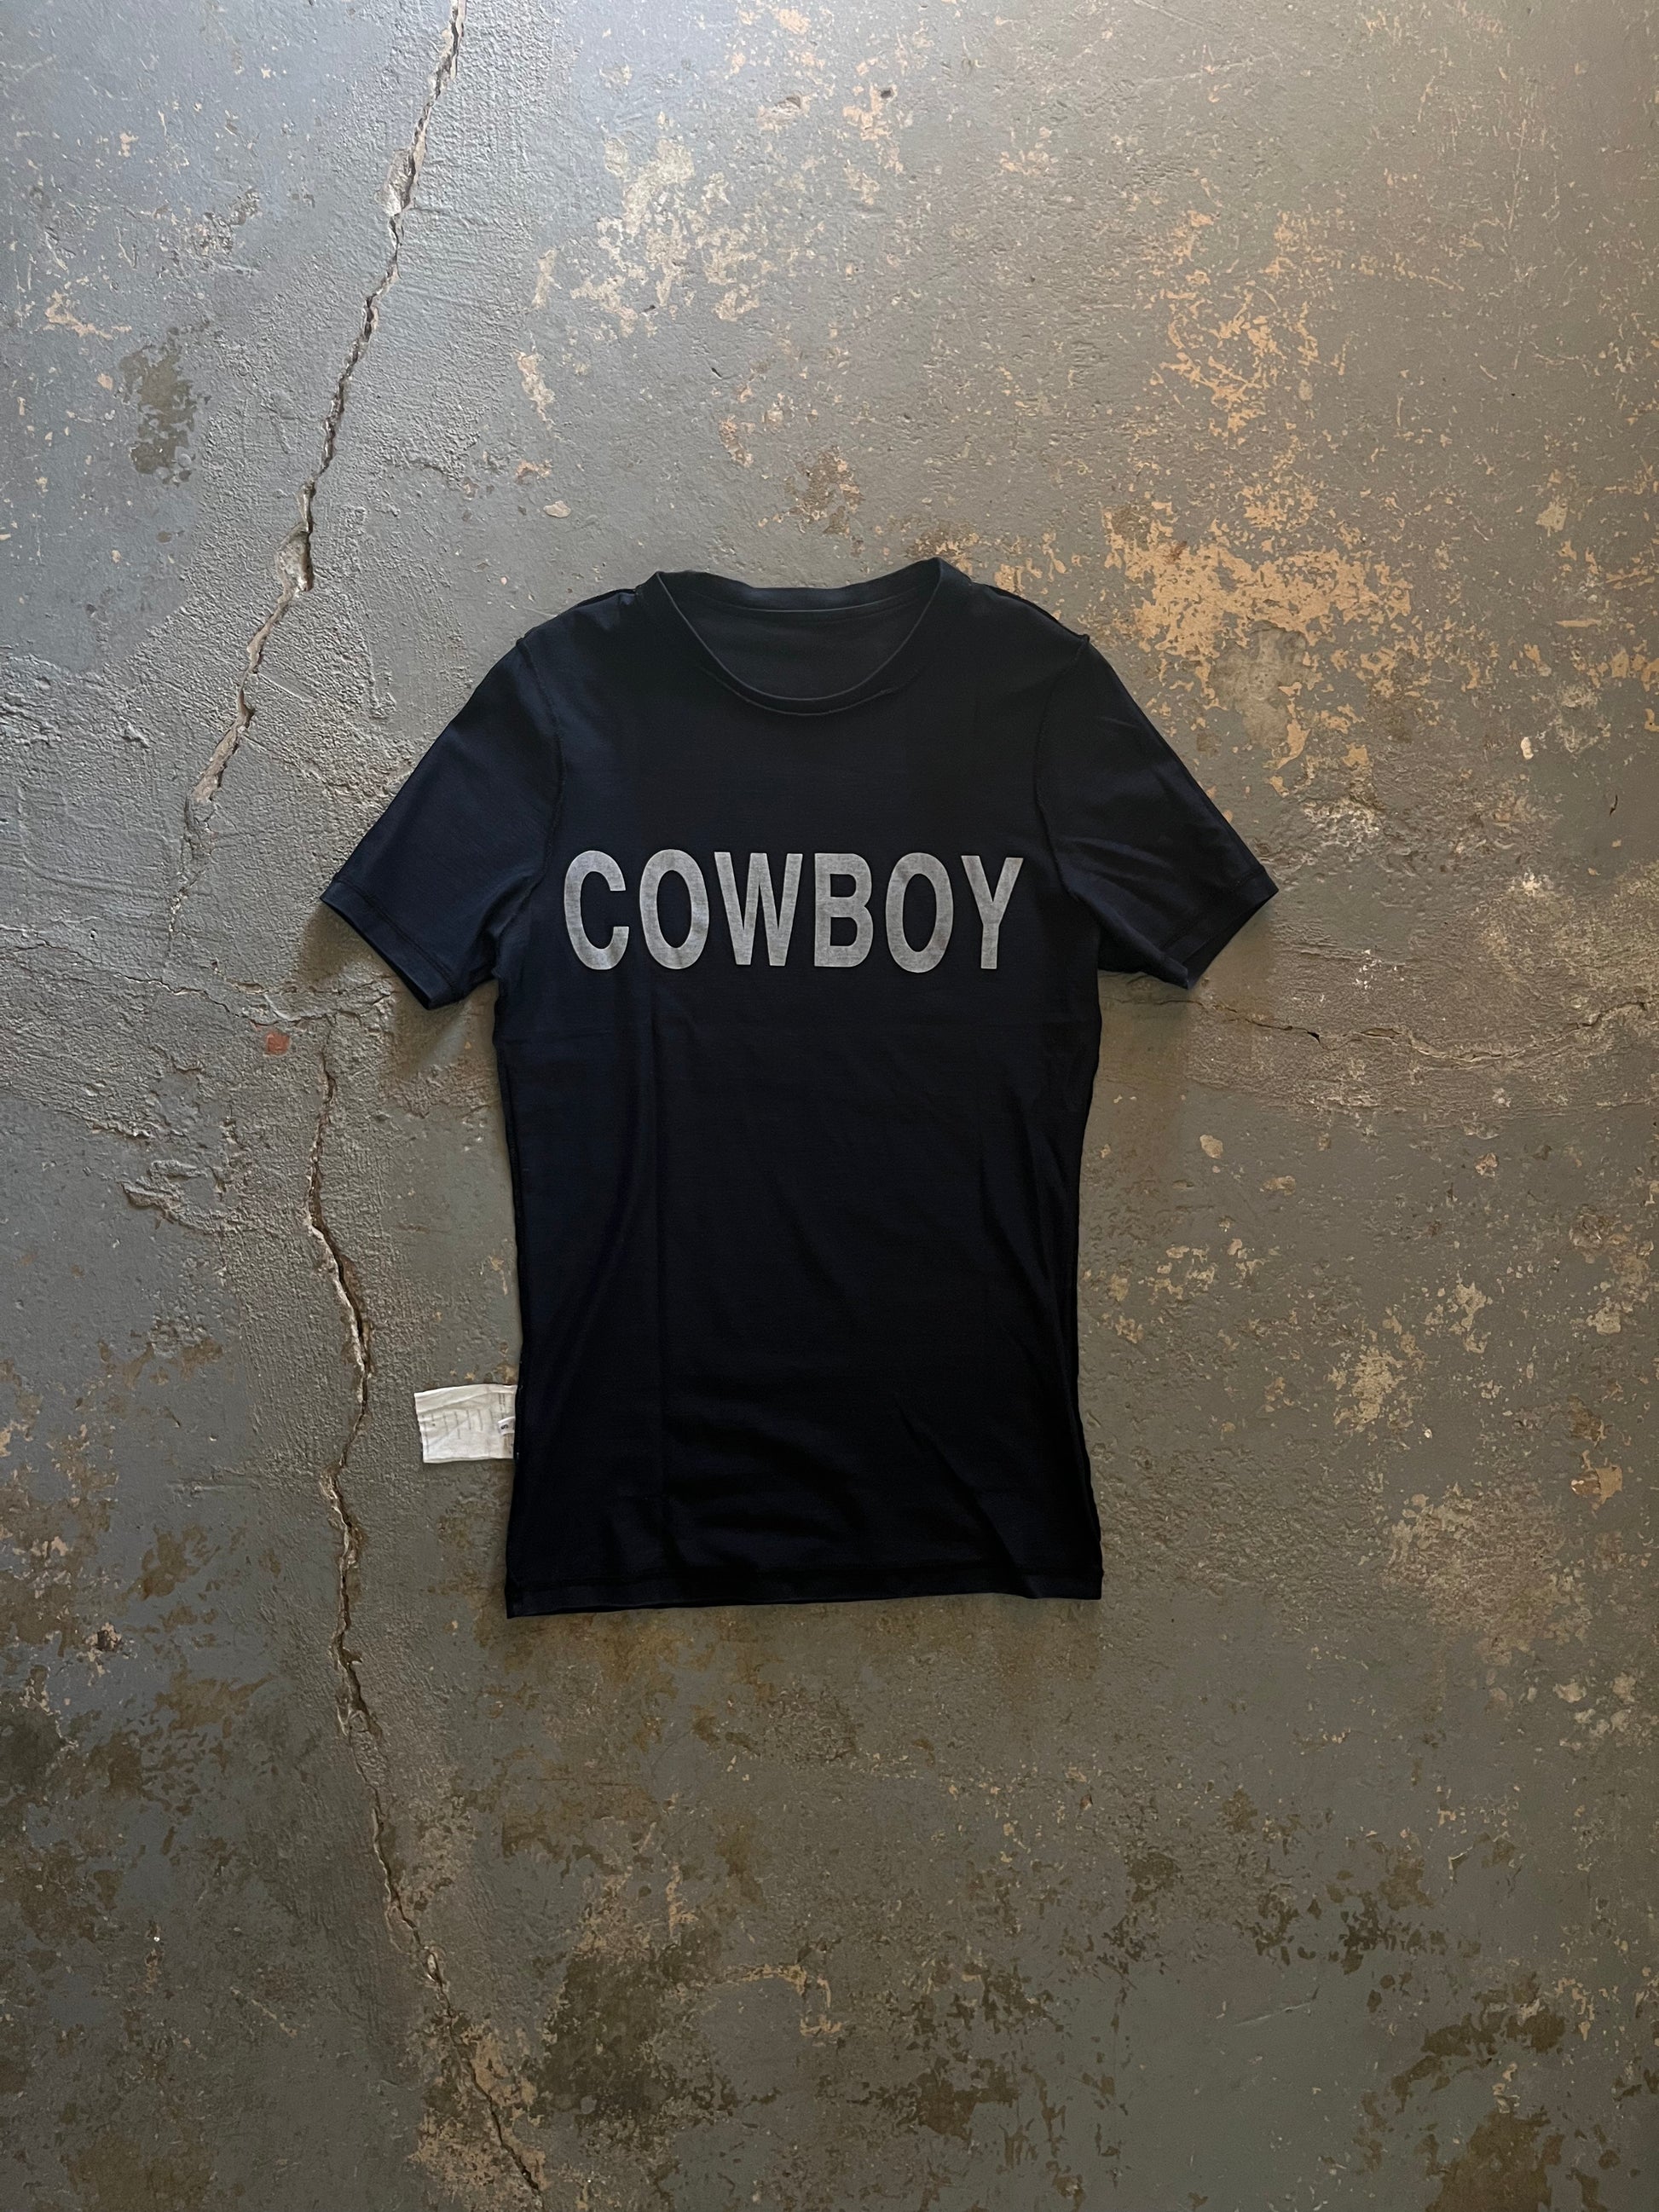 Helmut Lang SS04 Cowboy Tee – Sex Scabs